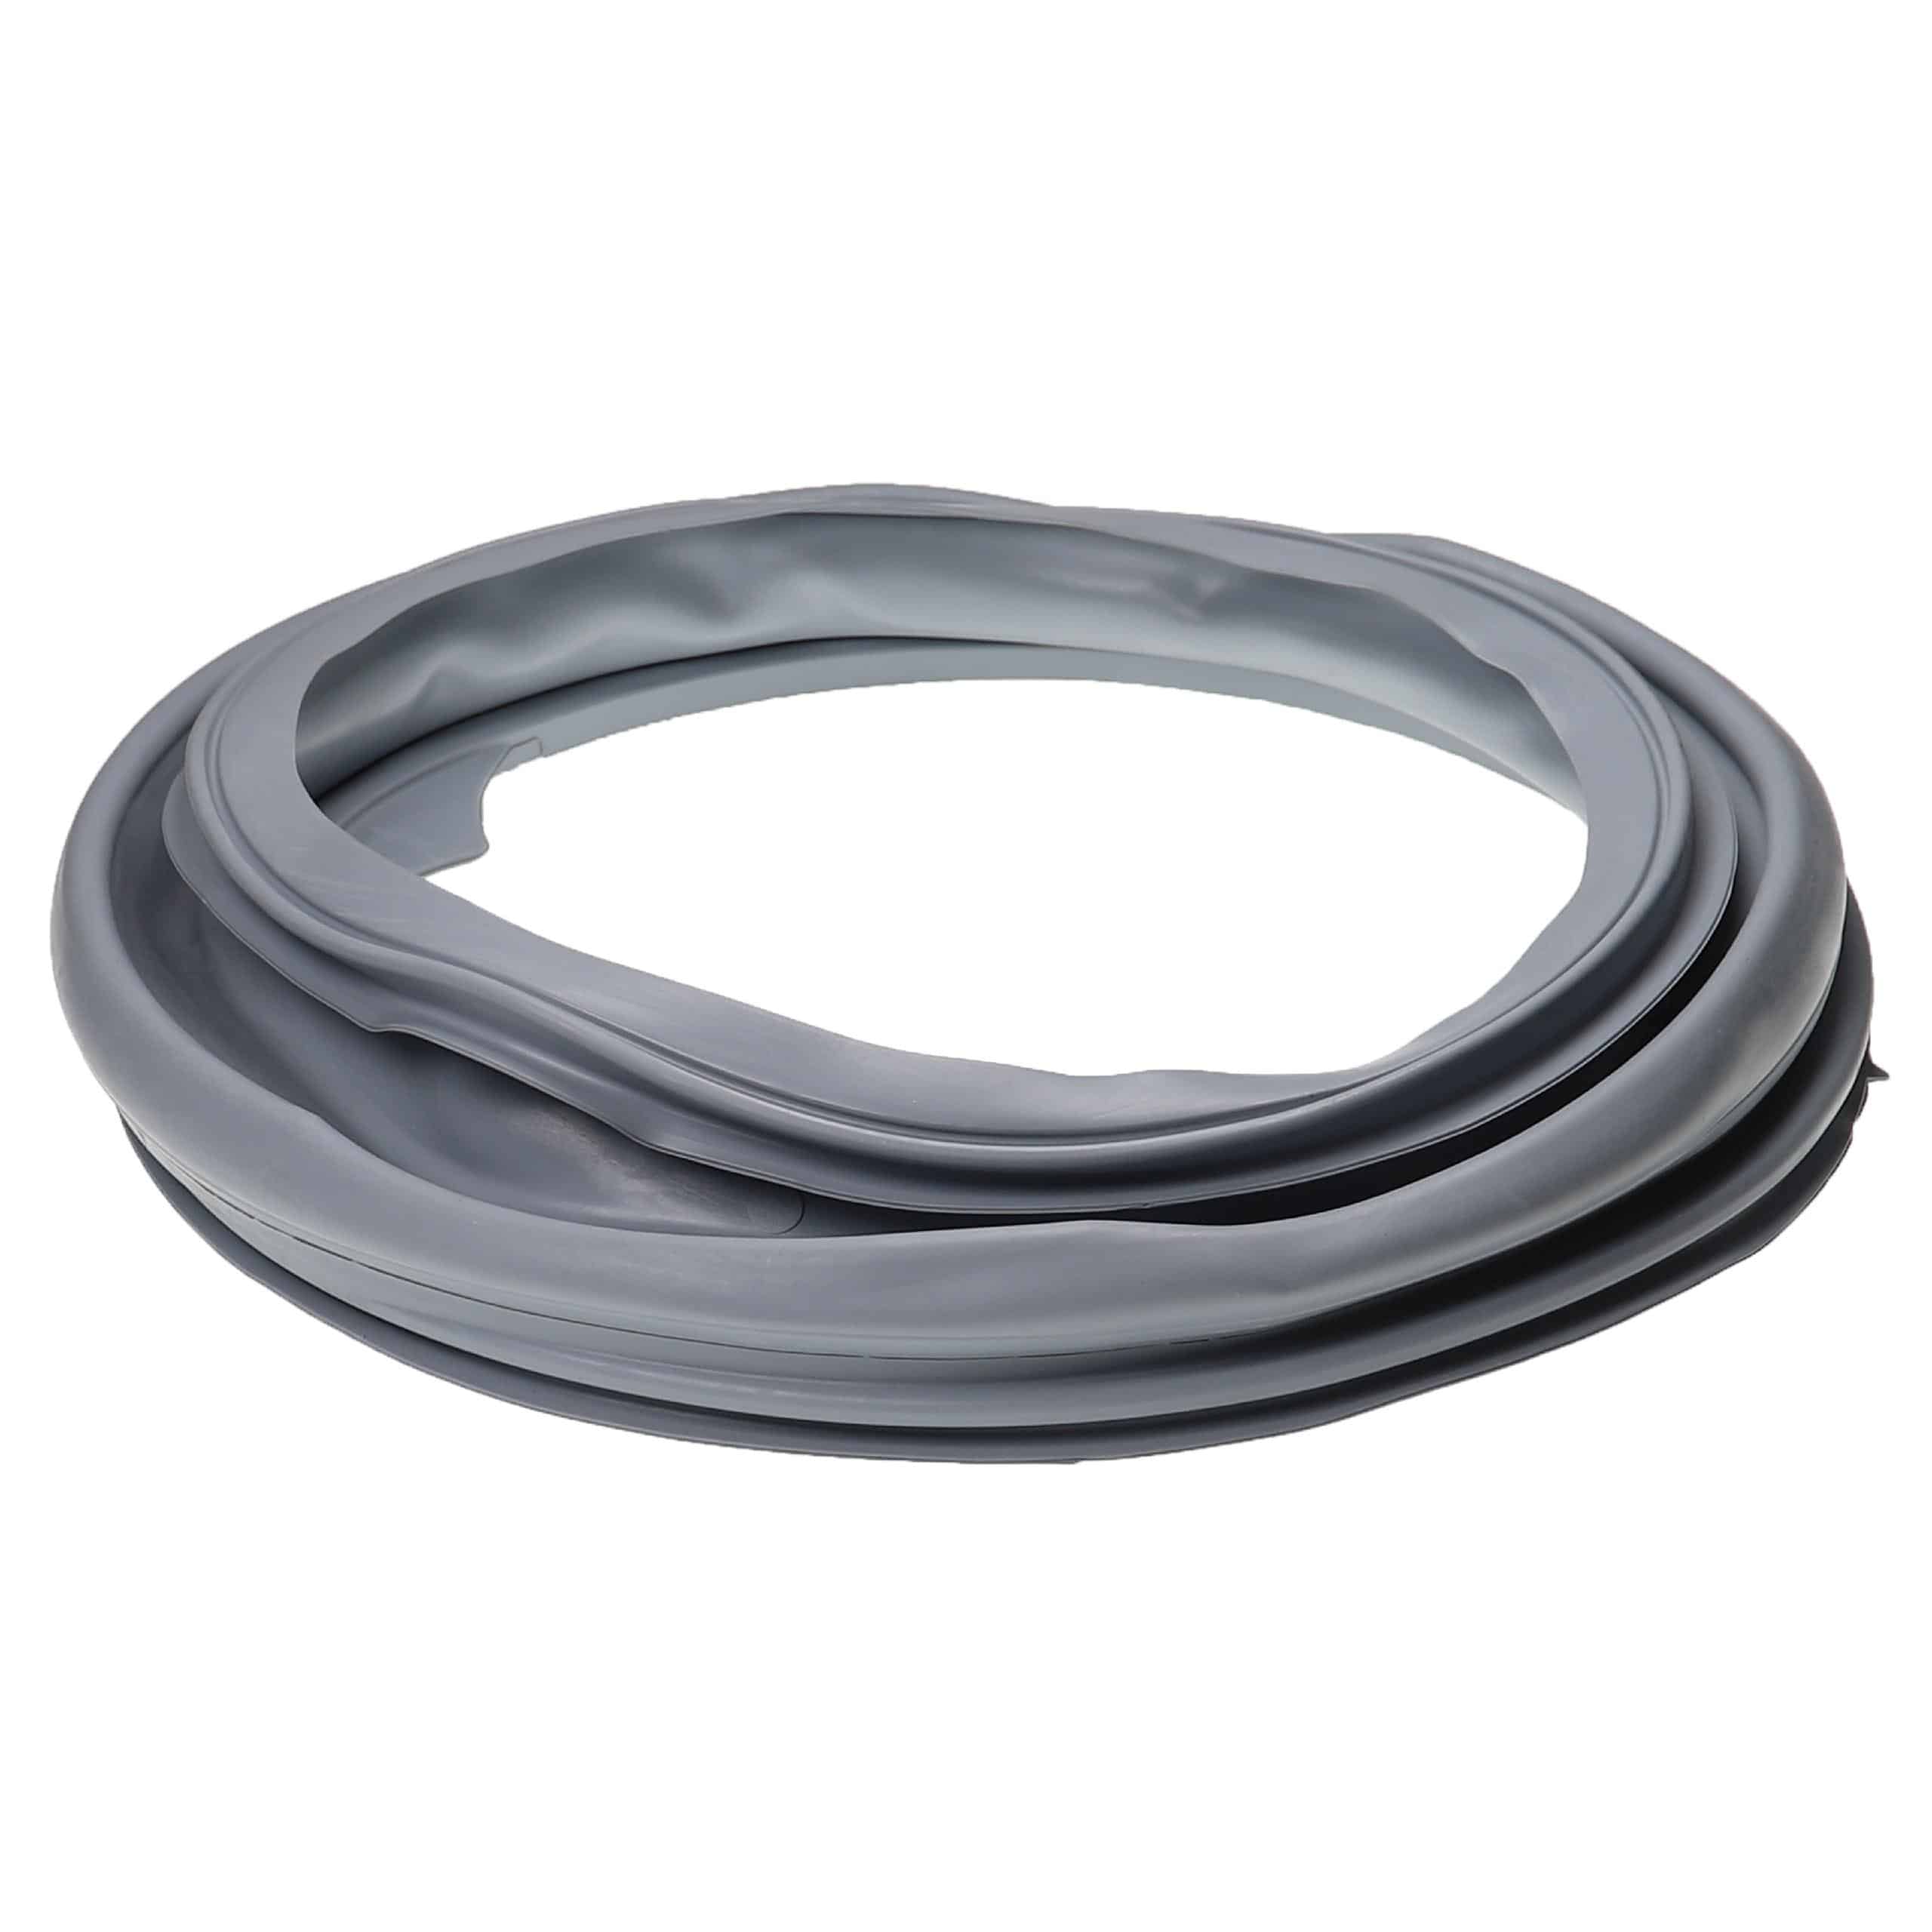 Door Seal replaces 461971408401, 461971408791, 481246068633 for Washing Machine